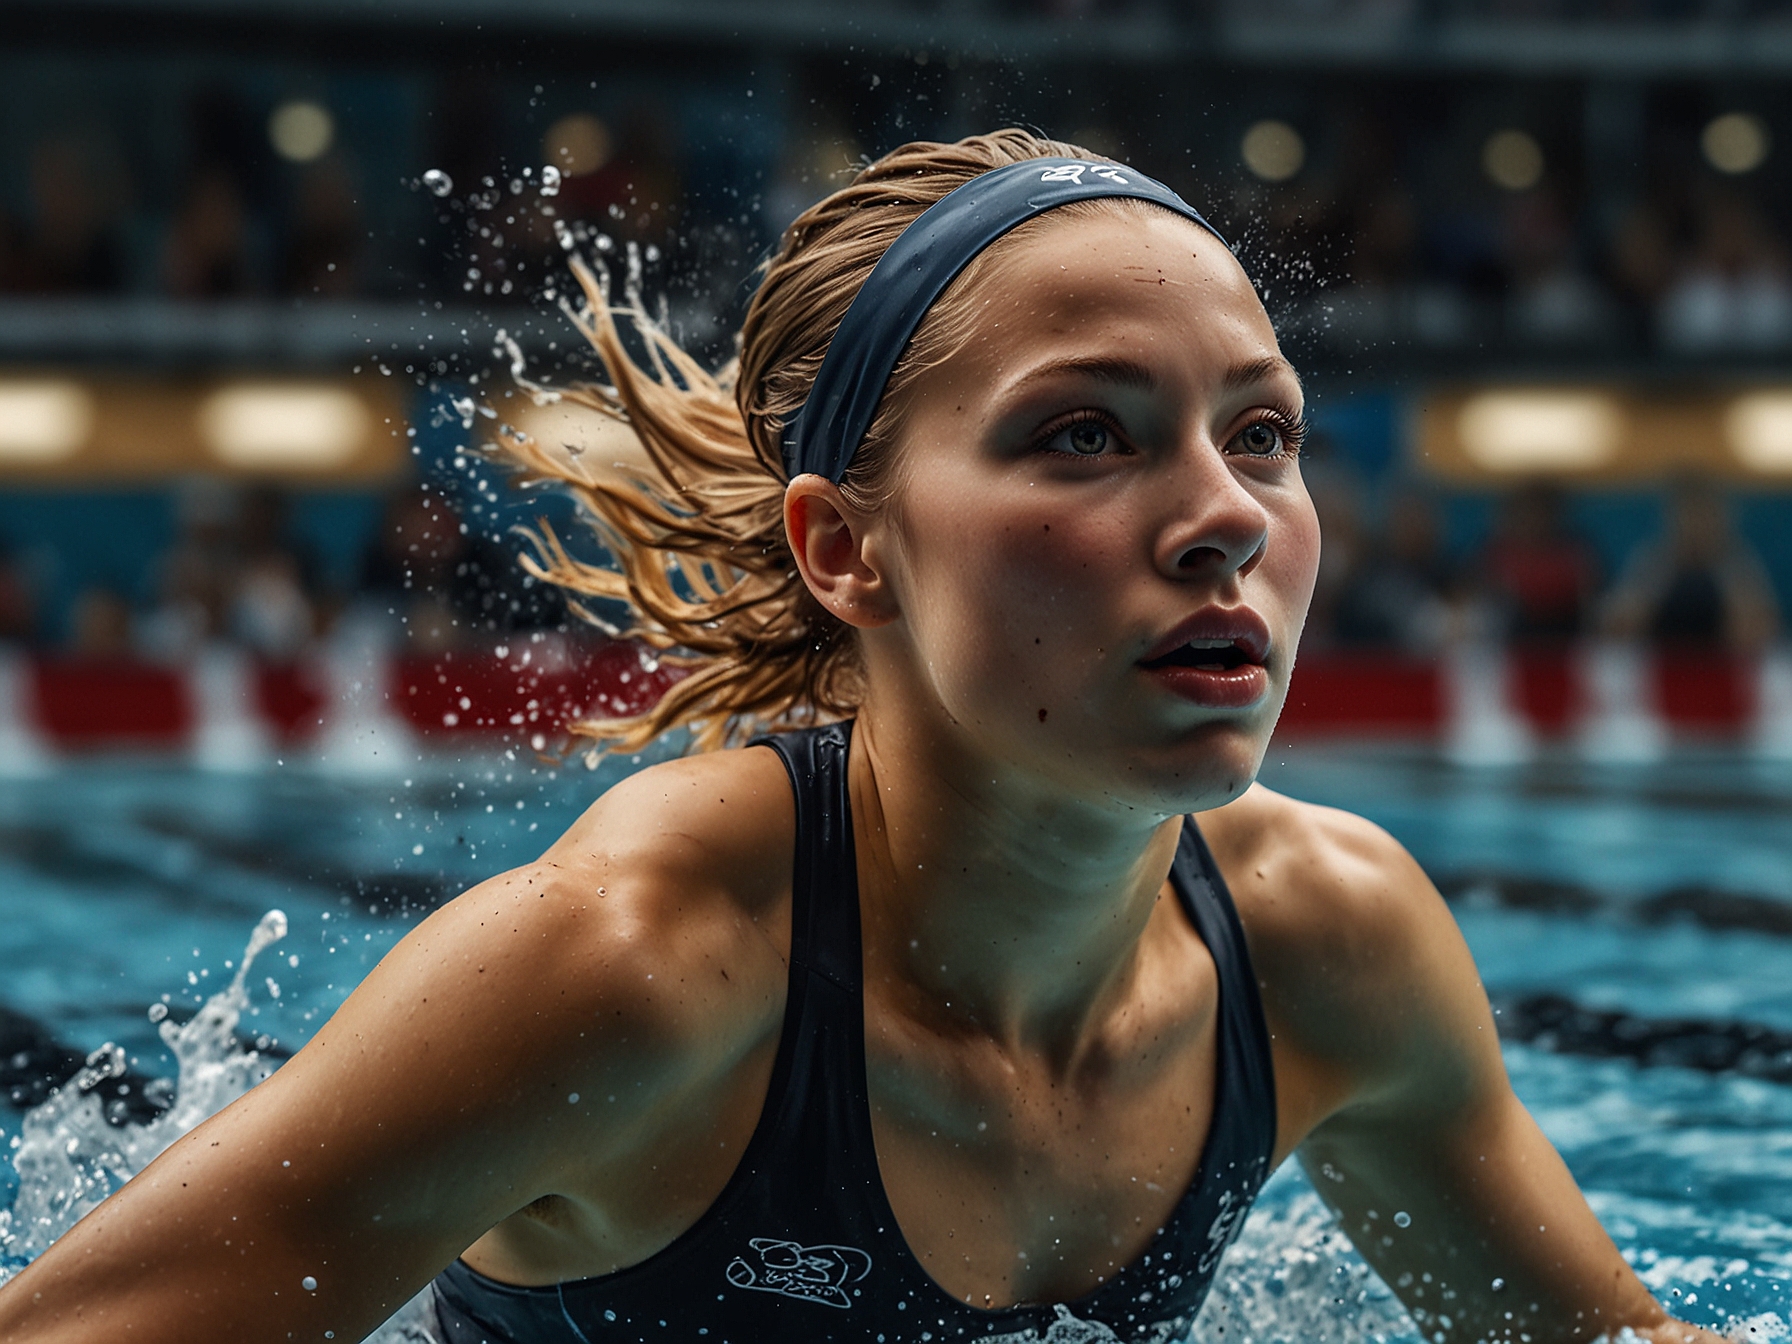 Bella Cothern in action during a swim meet, showcasing her freestyle technique. The intensity and focus on her face illustrate her commitment and preparation for the U.S. Olympic Trials.